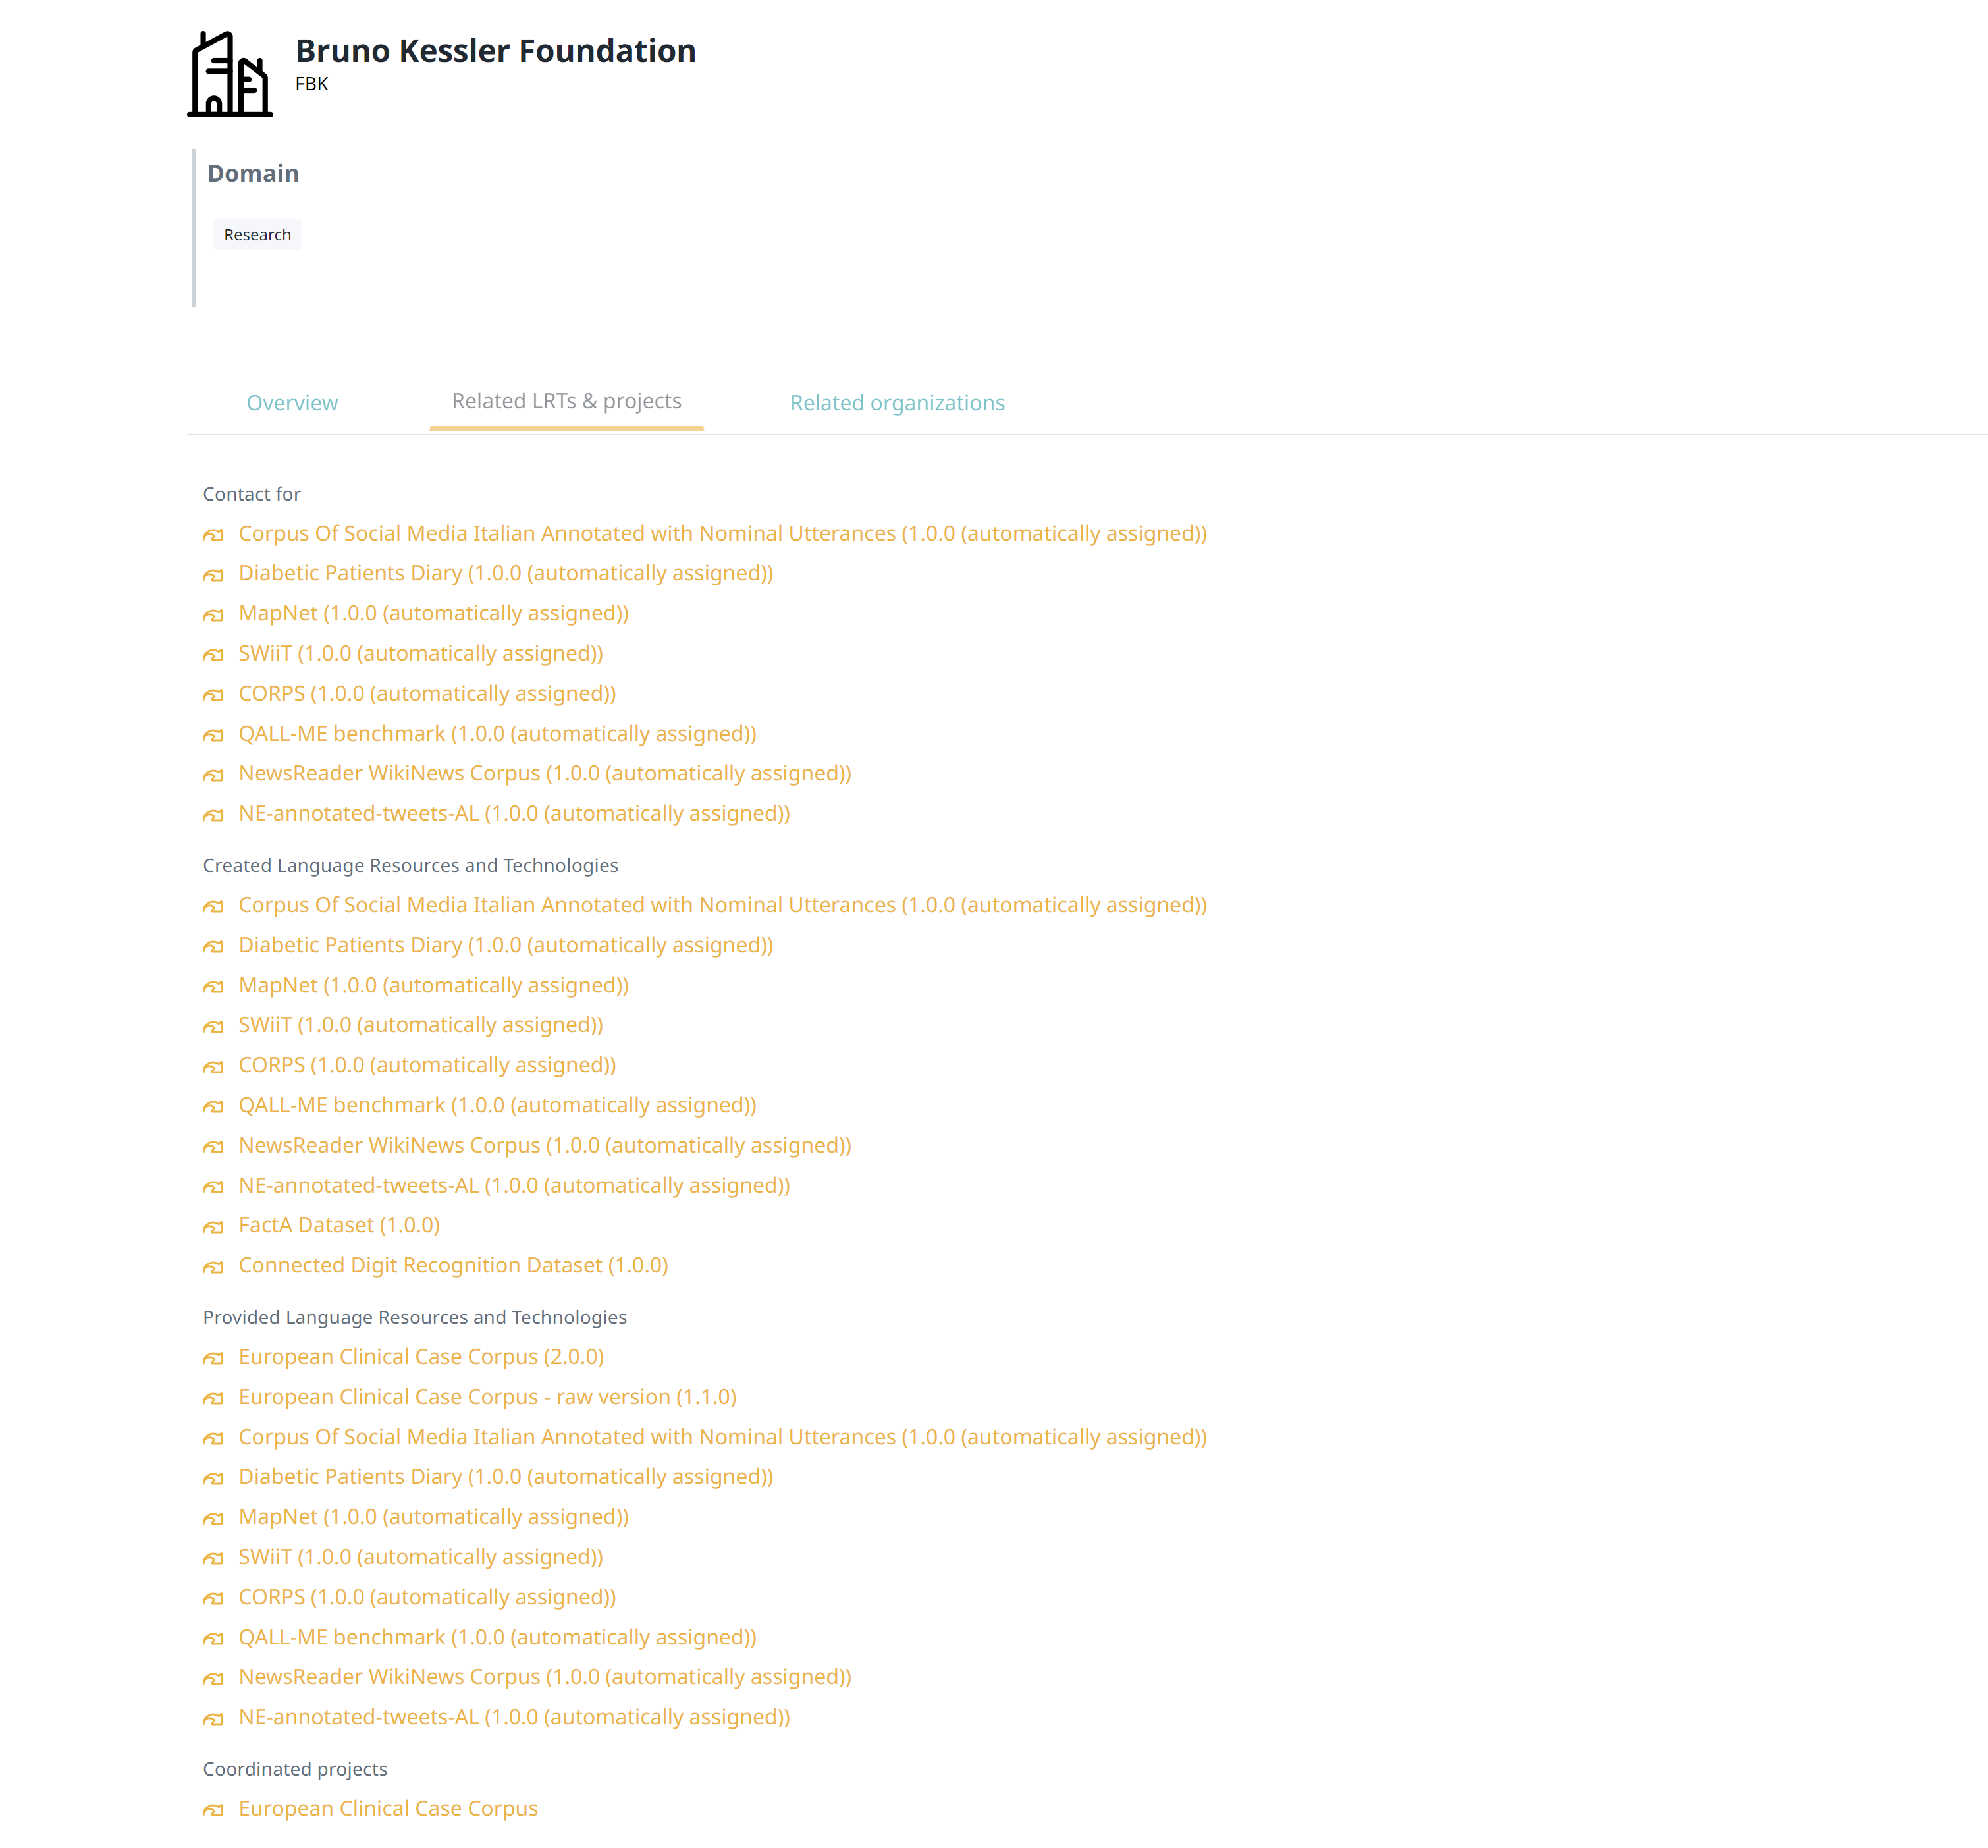 View page of an organization (related LRTs tab)